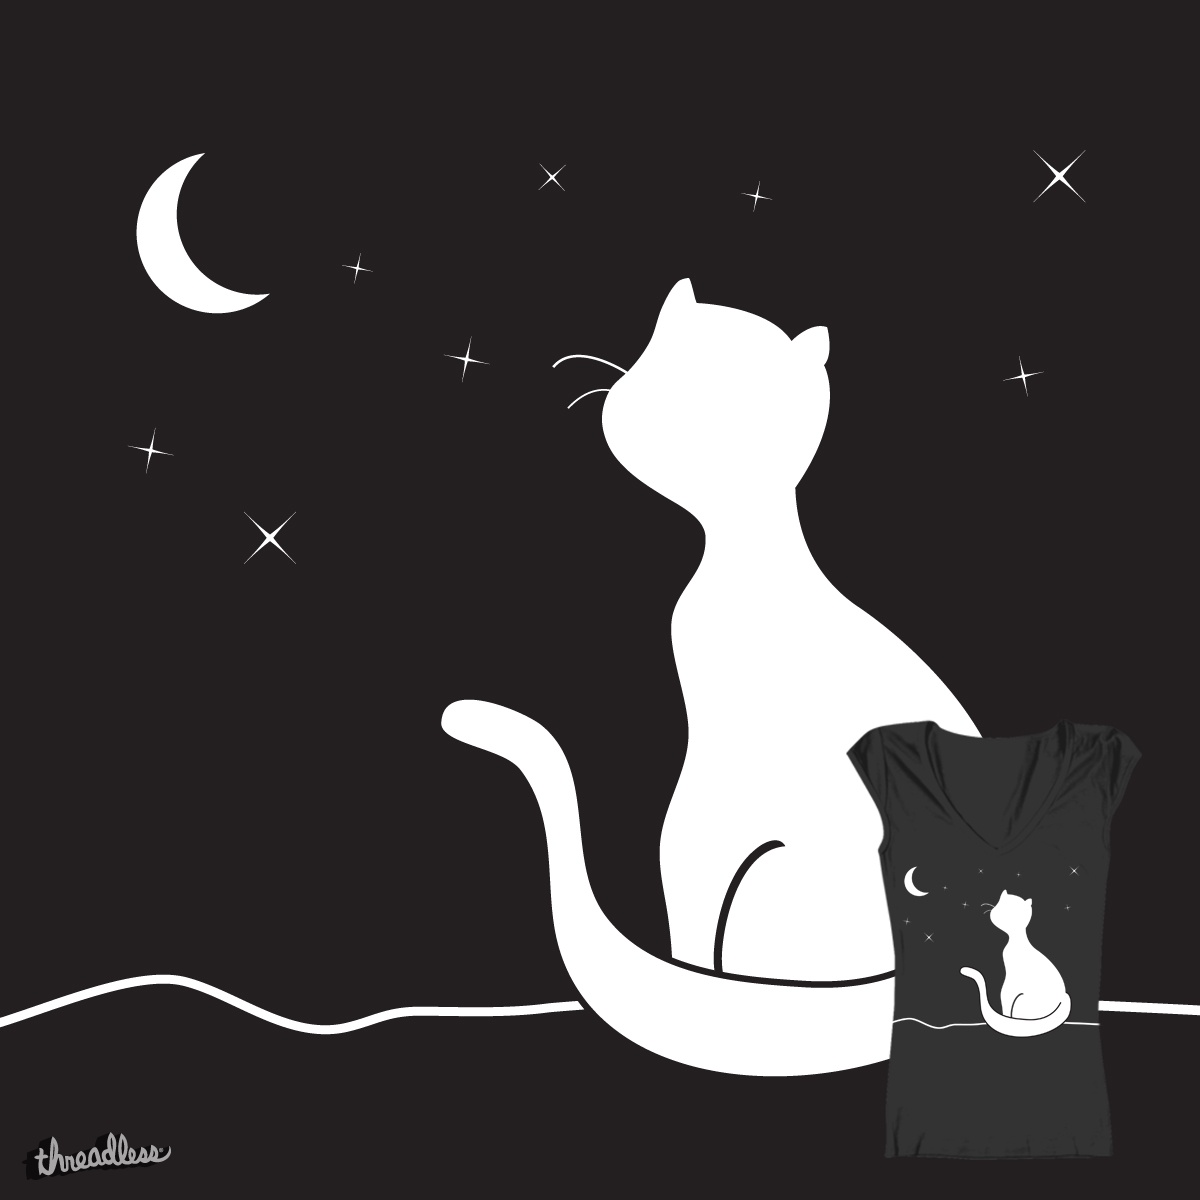 That cat under the Moon, a cool t-shirt design